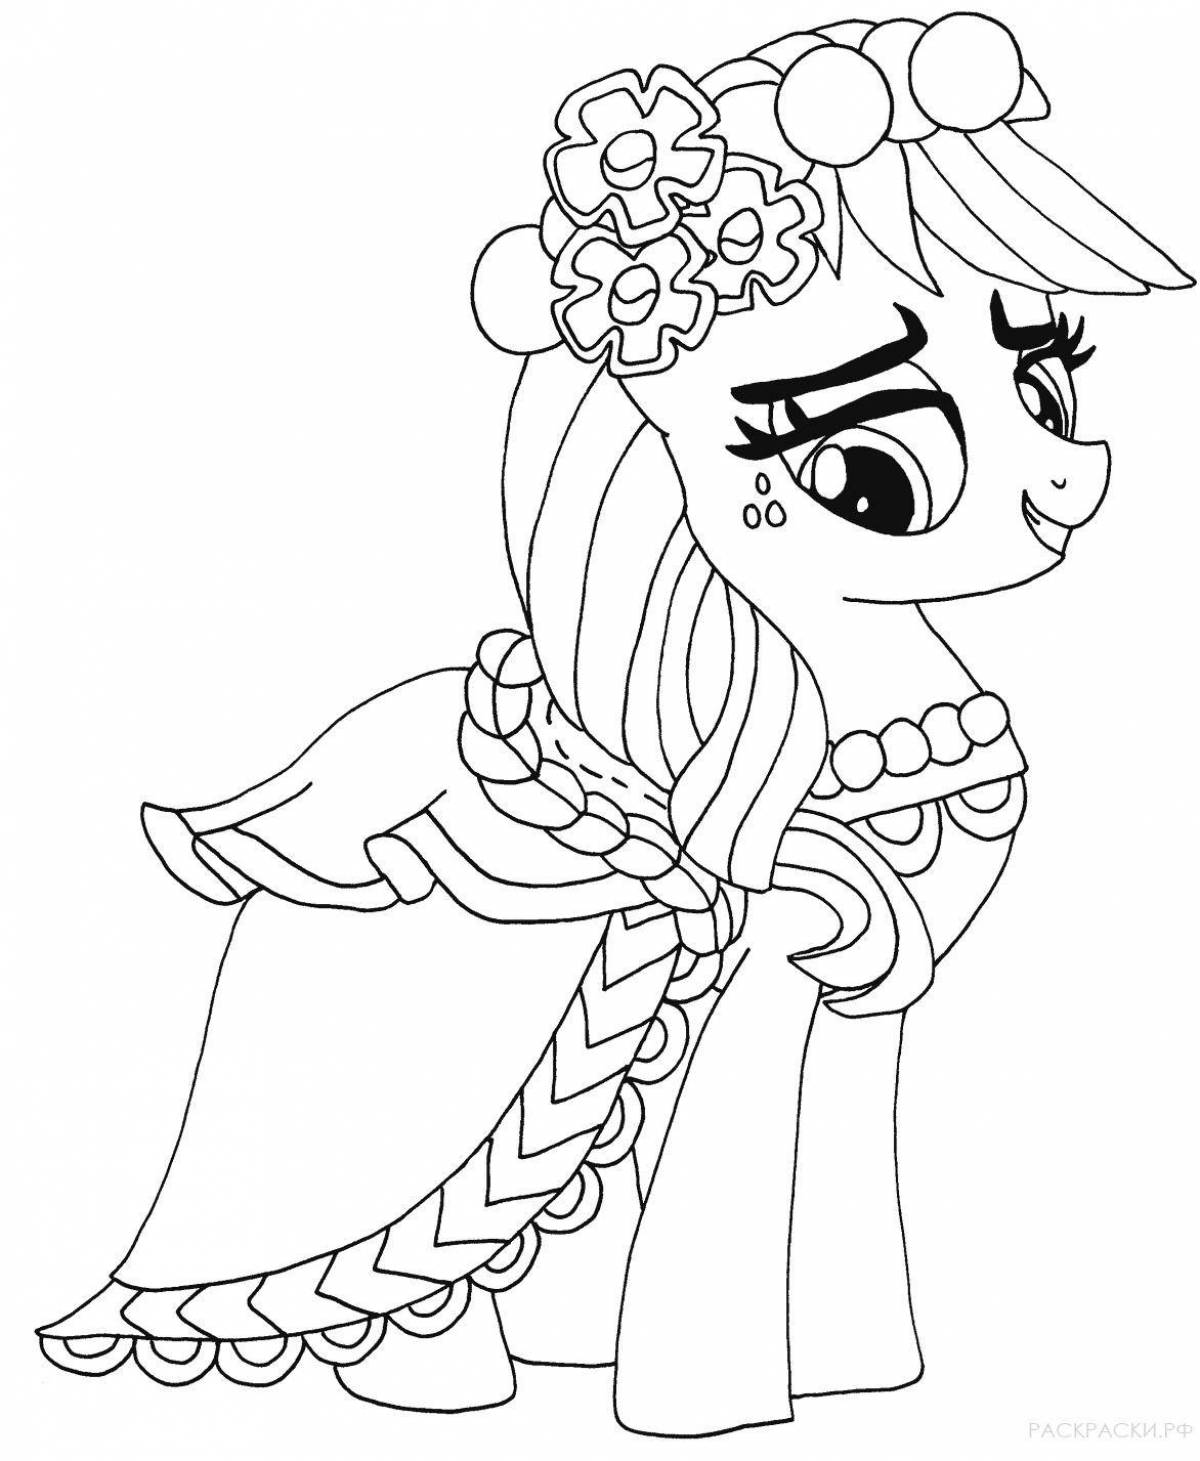 Colorful coloring of a pony in a dress